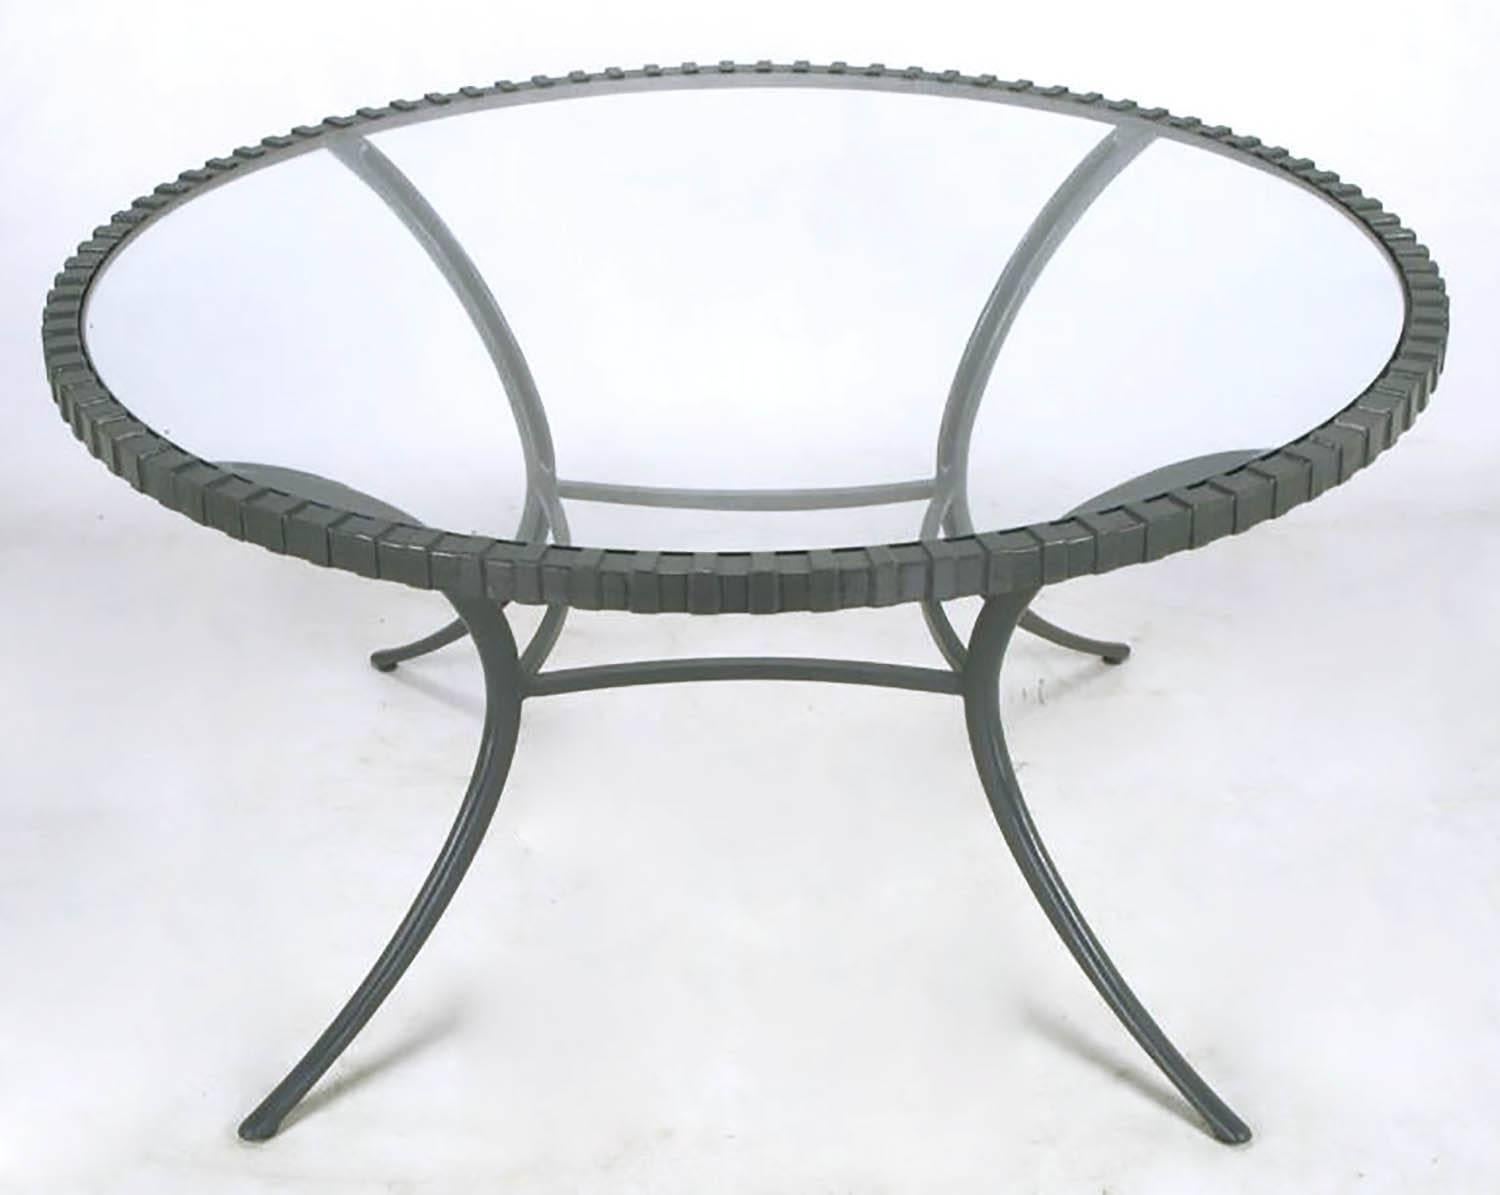 Thinline cast aluminum, glass top dining table in fresh slate gray enamel. One of the first manufacturers of cast aluminum furniture, Thinline used only the best castings and alloys. As a result the Fine edging and crisp lines have stood the test of